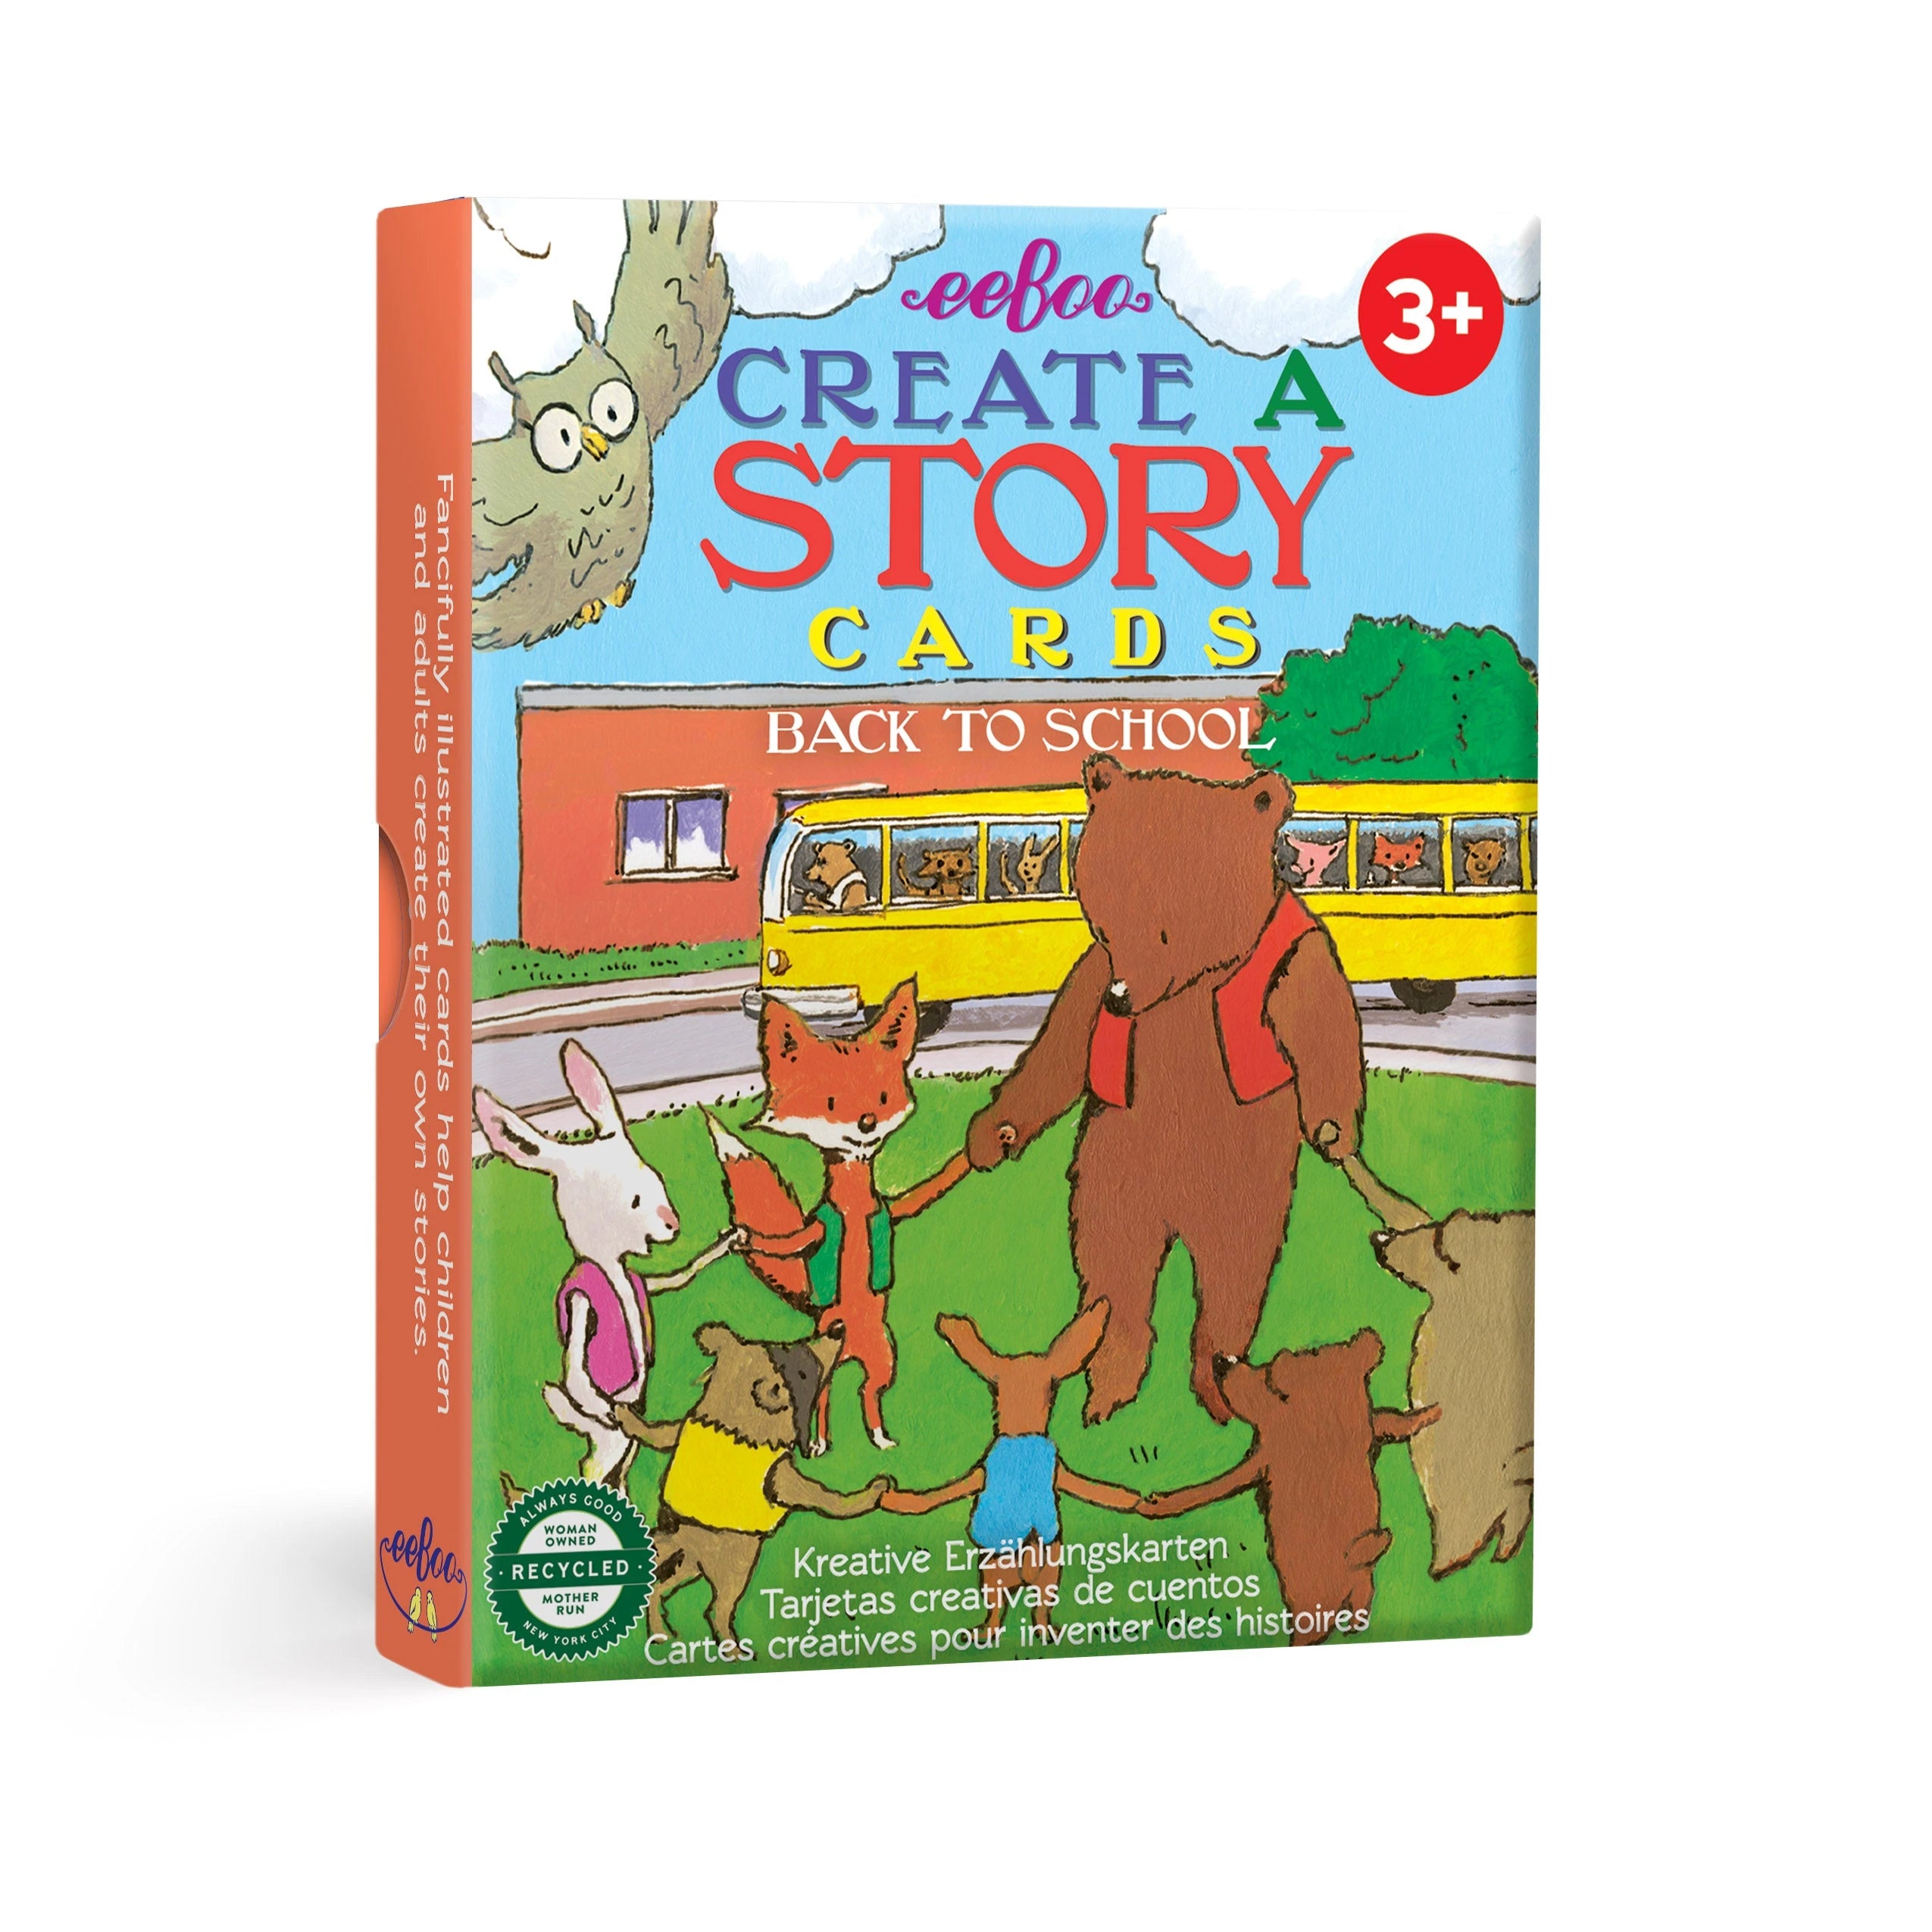 CREATE A STORY CARDS BACK TO SCHOOL